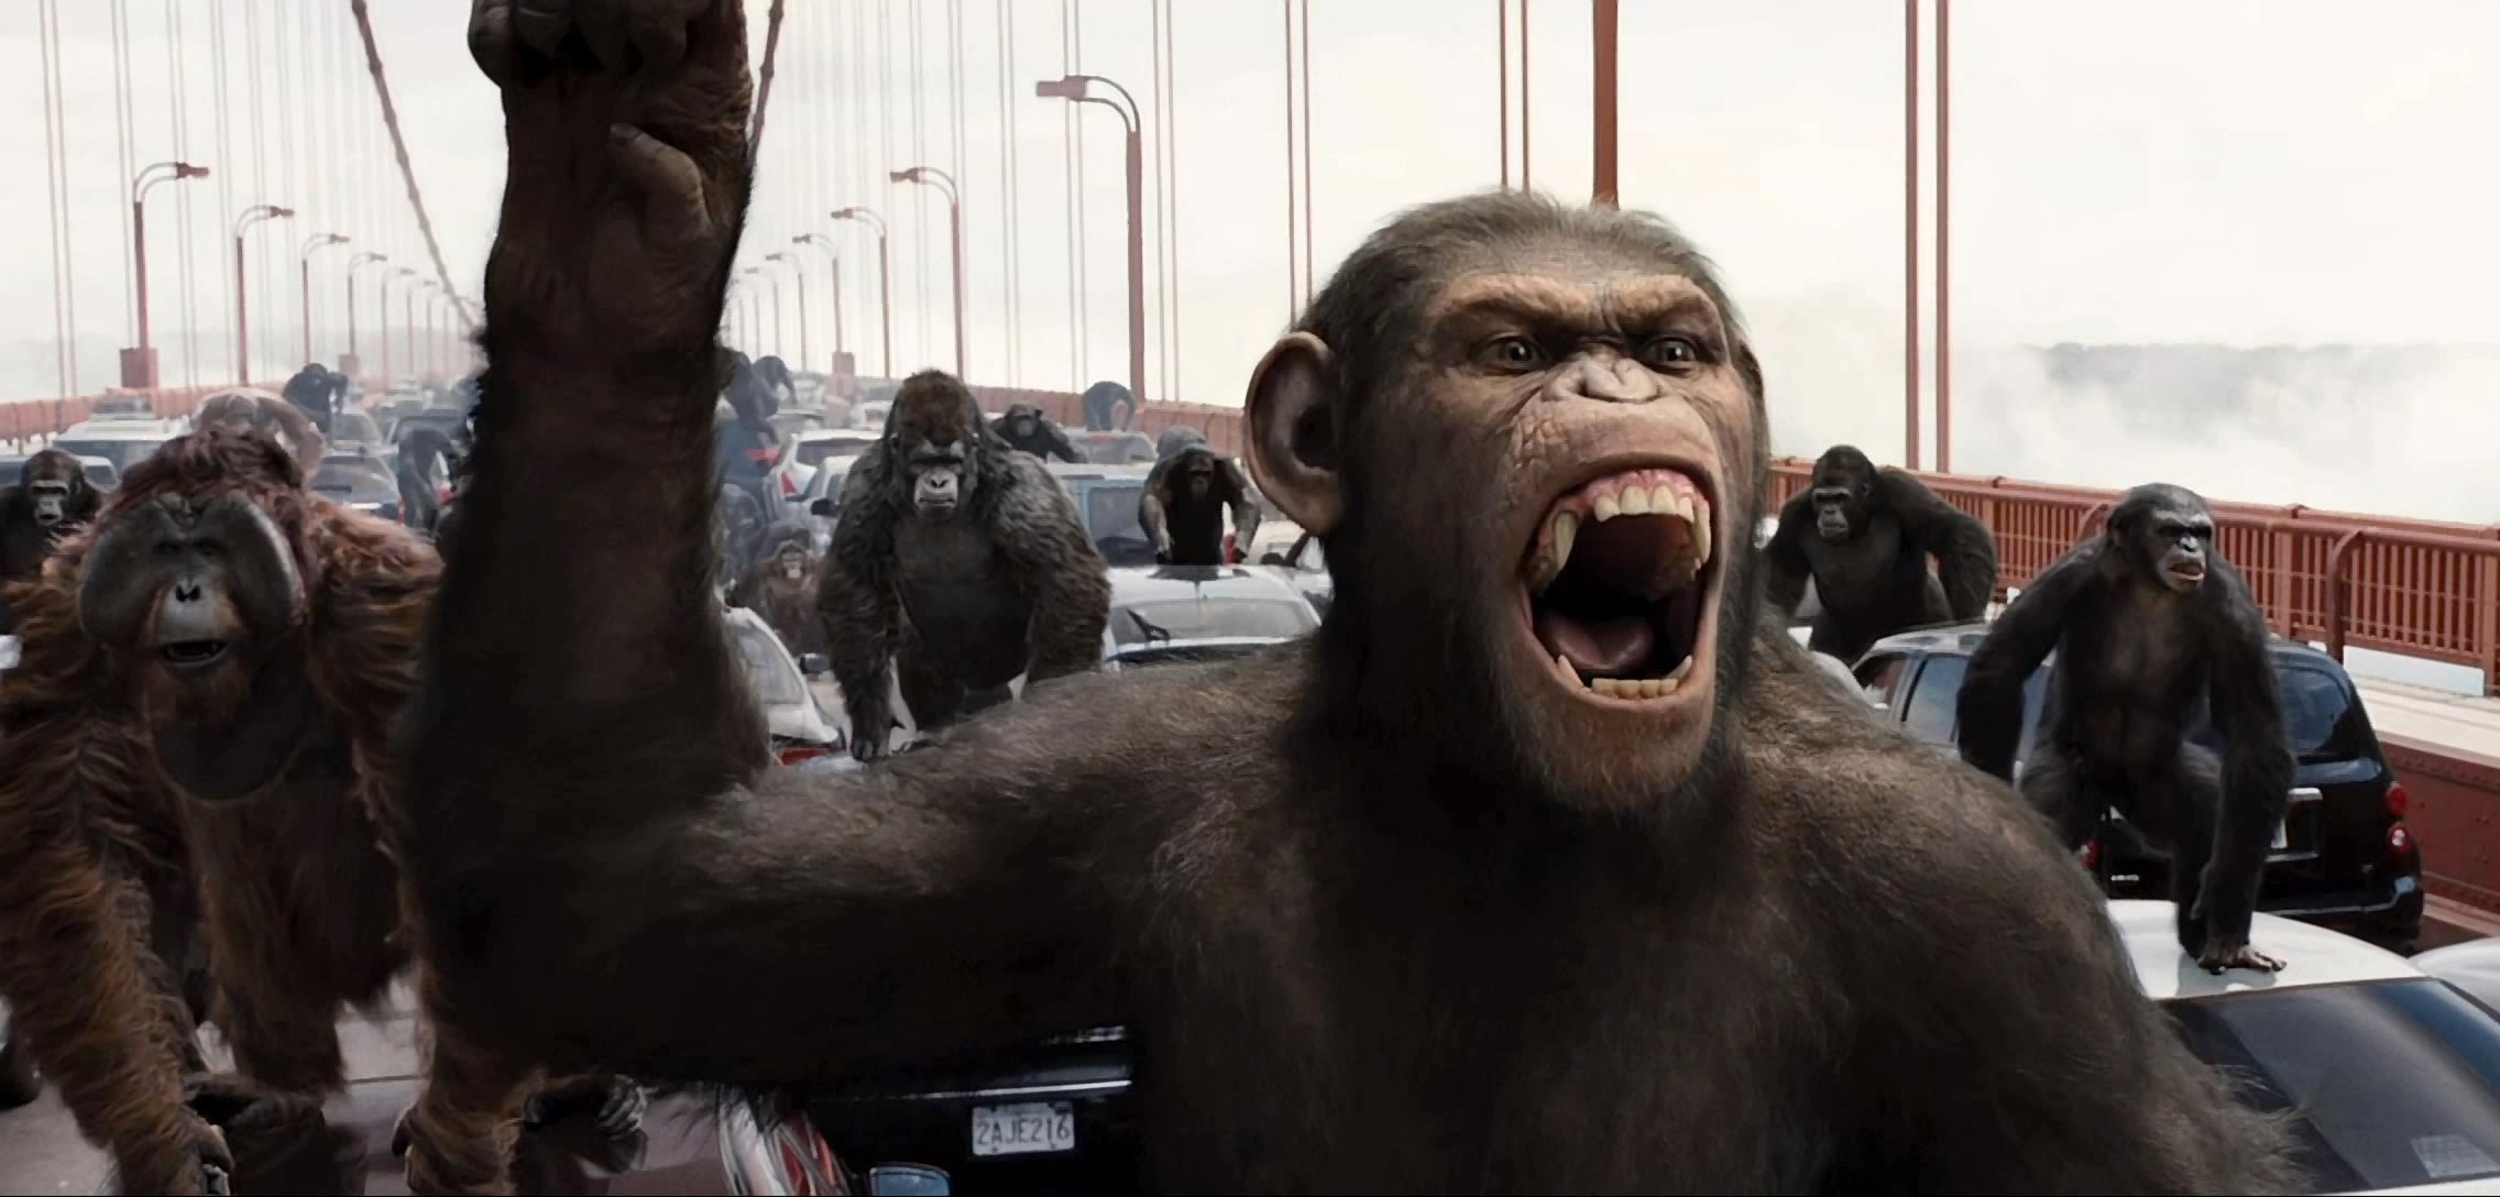 <p>The original <span><em>Planet of the Apes</em> </span>film remains a sci-fi classic, spawning a franchise spanning decades. In 2011, fans of the films finally got the origin story they’d long wanted, and <span><em>Rise of the Planet of the Apes</em> </span>focuses on Caesar (played in motion capture by Andy Serkis). The young chimp gains enhanced cognition due to an Alzheimer’s drug, and the stage is set for simian conquest, particularly once a virulent form of flu starts to spread across the globe. Though the film takes some liberties with established science, its depiction of various ape species is remarkably accurate, and its depiction of the spread of a pandemic hits particularly close to home in the age of COVID-19. The subsequent film, <span><em>Dawn of the Planet of the Apes</em>, </span>is likewise <a href="https://www.bbc.com/news/science-environment-28258990#:~:text=In%20real%20life%2C%20apes%20do,a%20possibility%2C%22%20he%20explains."><span>decently accurate from a scientific point of view.</span></a></p><p>You may also like: <a href='https://www.yardbarker.com/entertainment/articles/20_films_about_math_mathematicians_and_math_geniuses_020324/s1__28630979'>20 films about math, mathematicians and math geniuses</a></p>